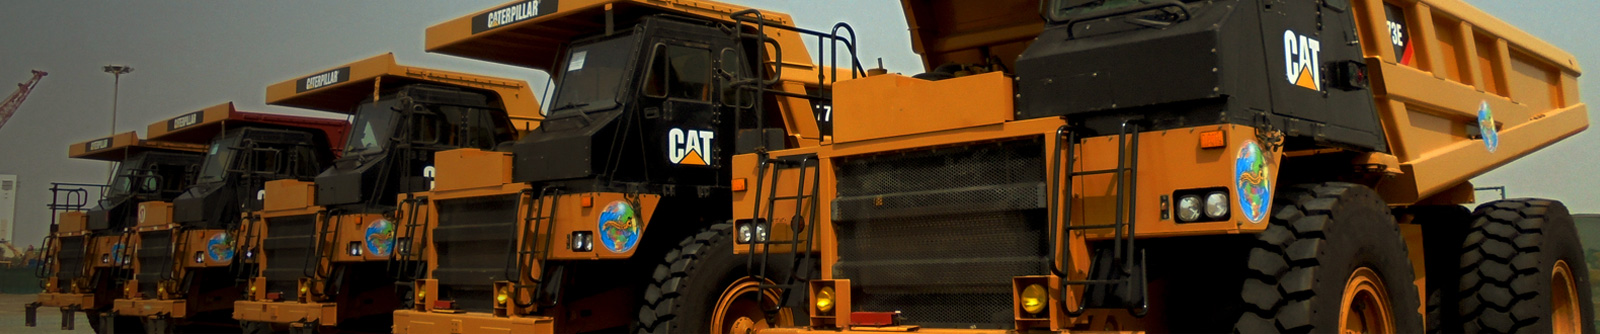 Used CAT construction machines in a row - Southwest Global